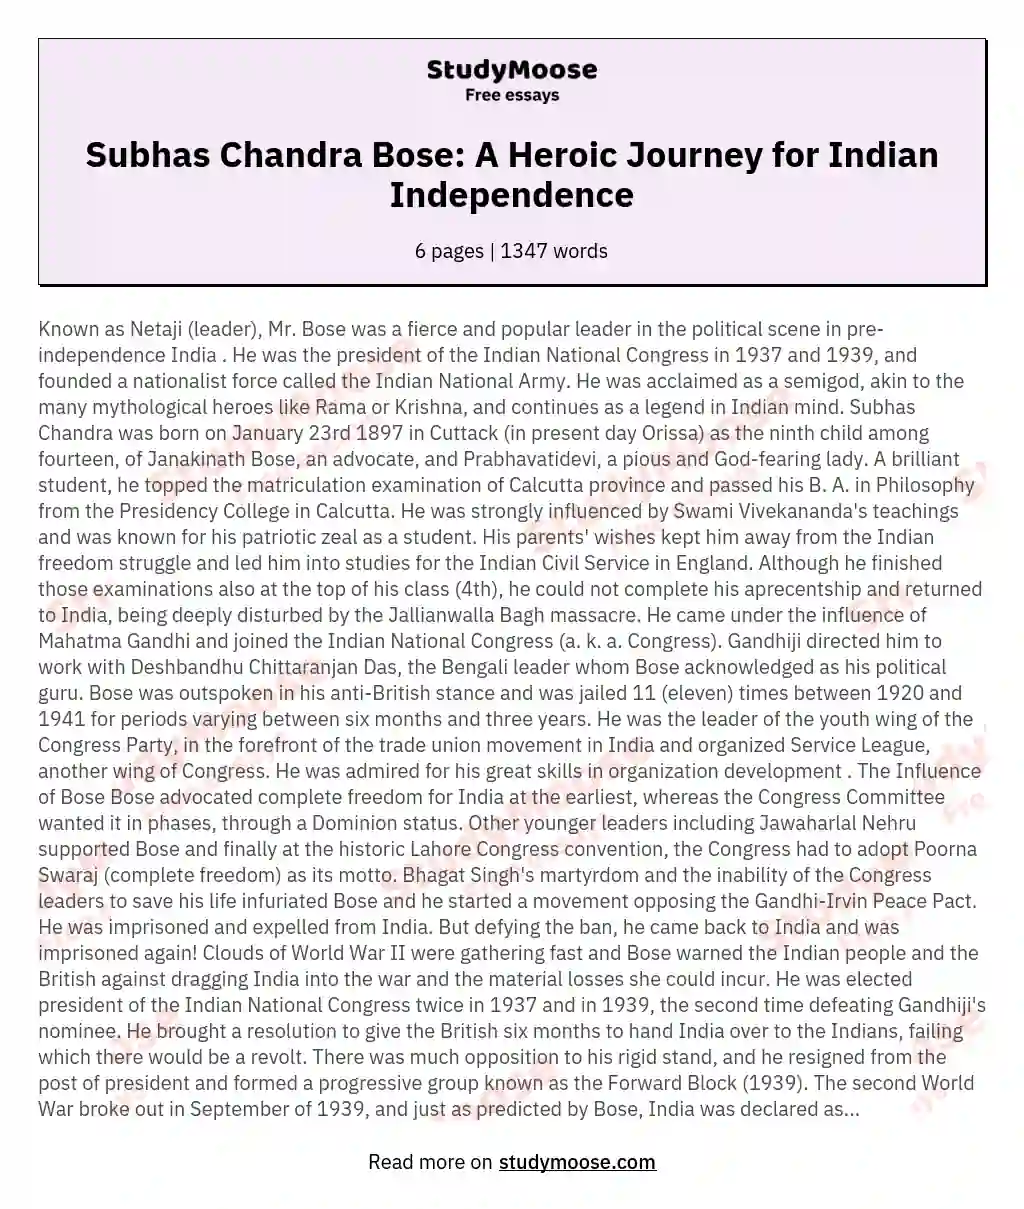 Subhas Chandra Bose: A Heroic Journey for Indian Independence essay